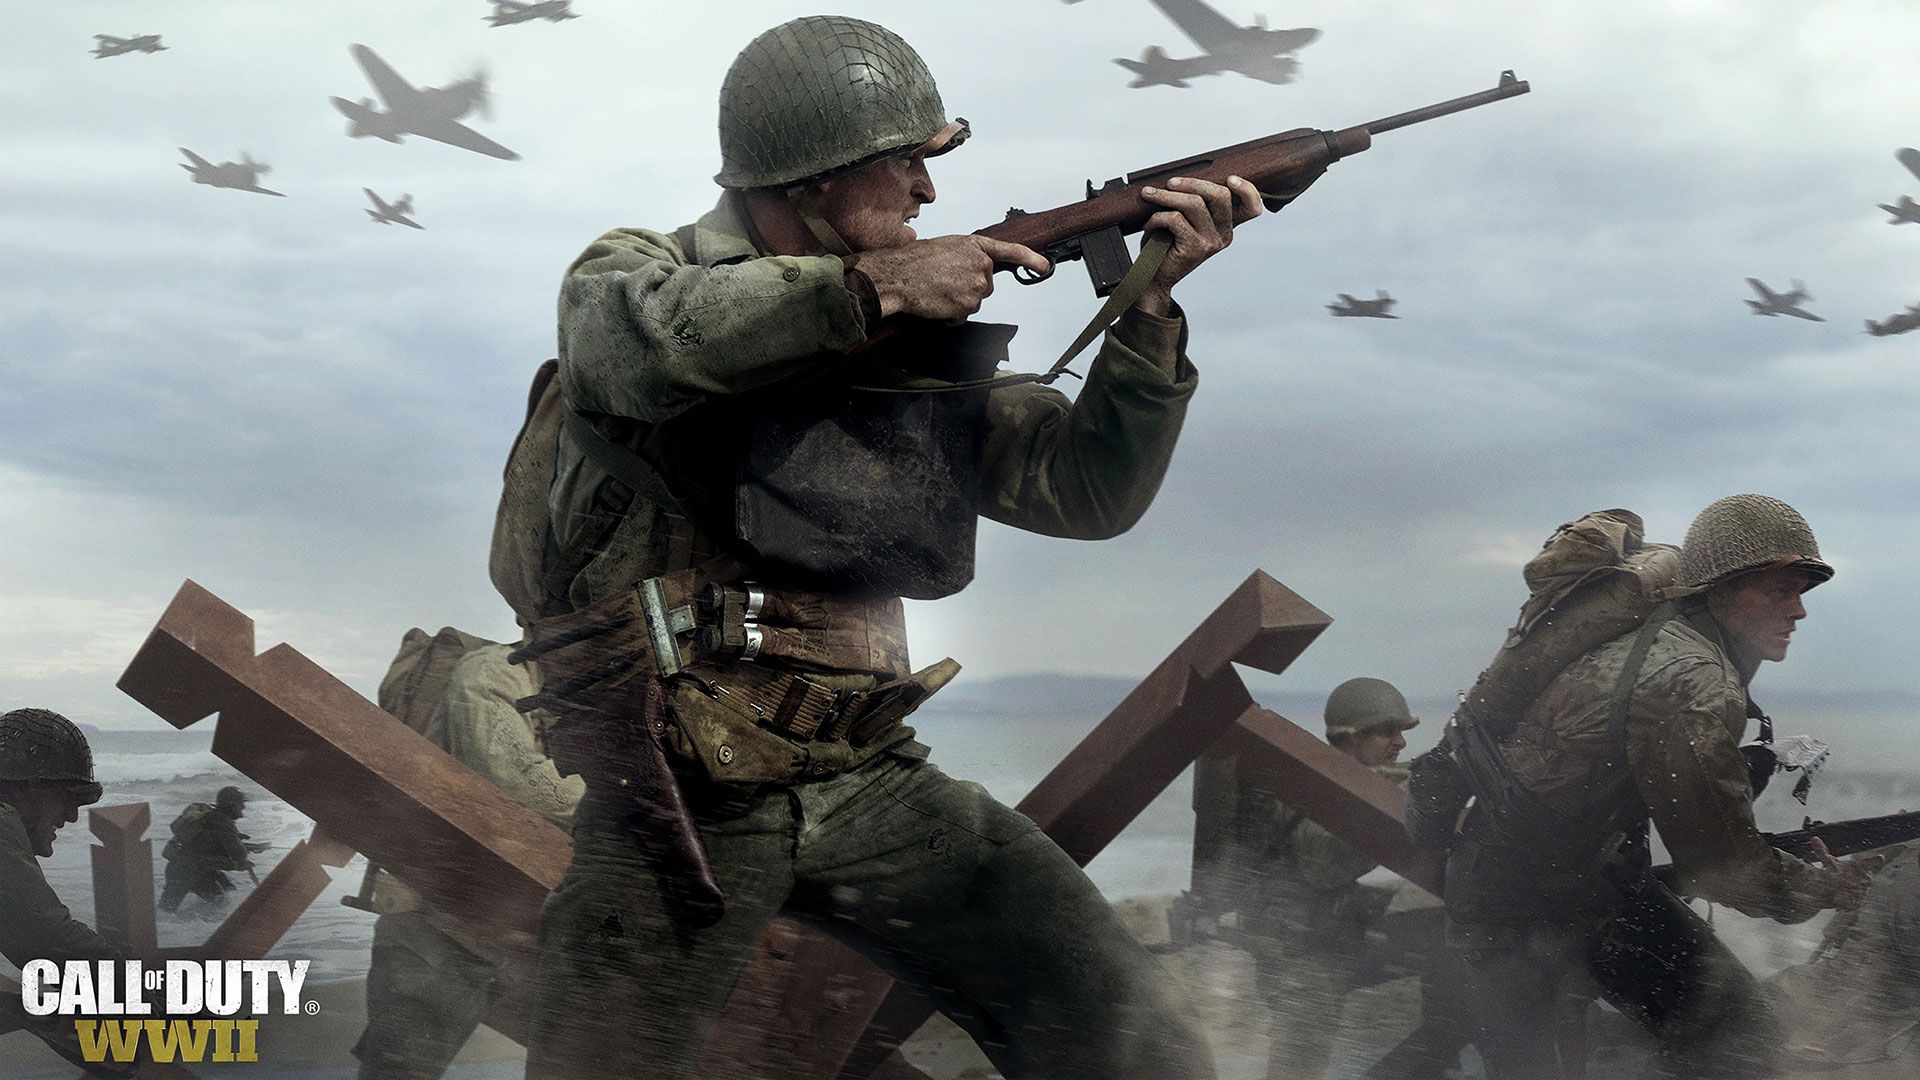 COD WW2 Basic Training List, Game Modes, Ranked Play & More Leaked